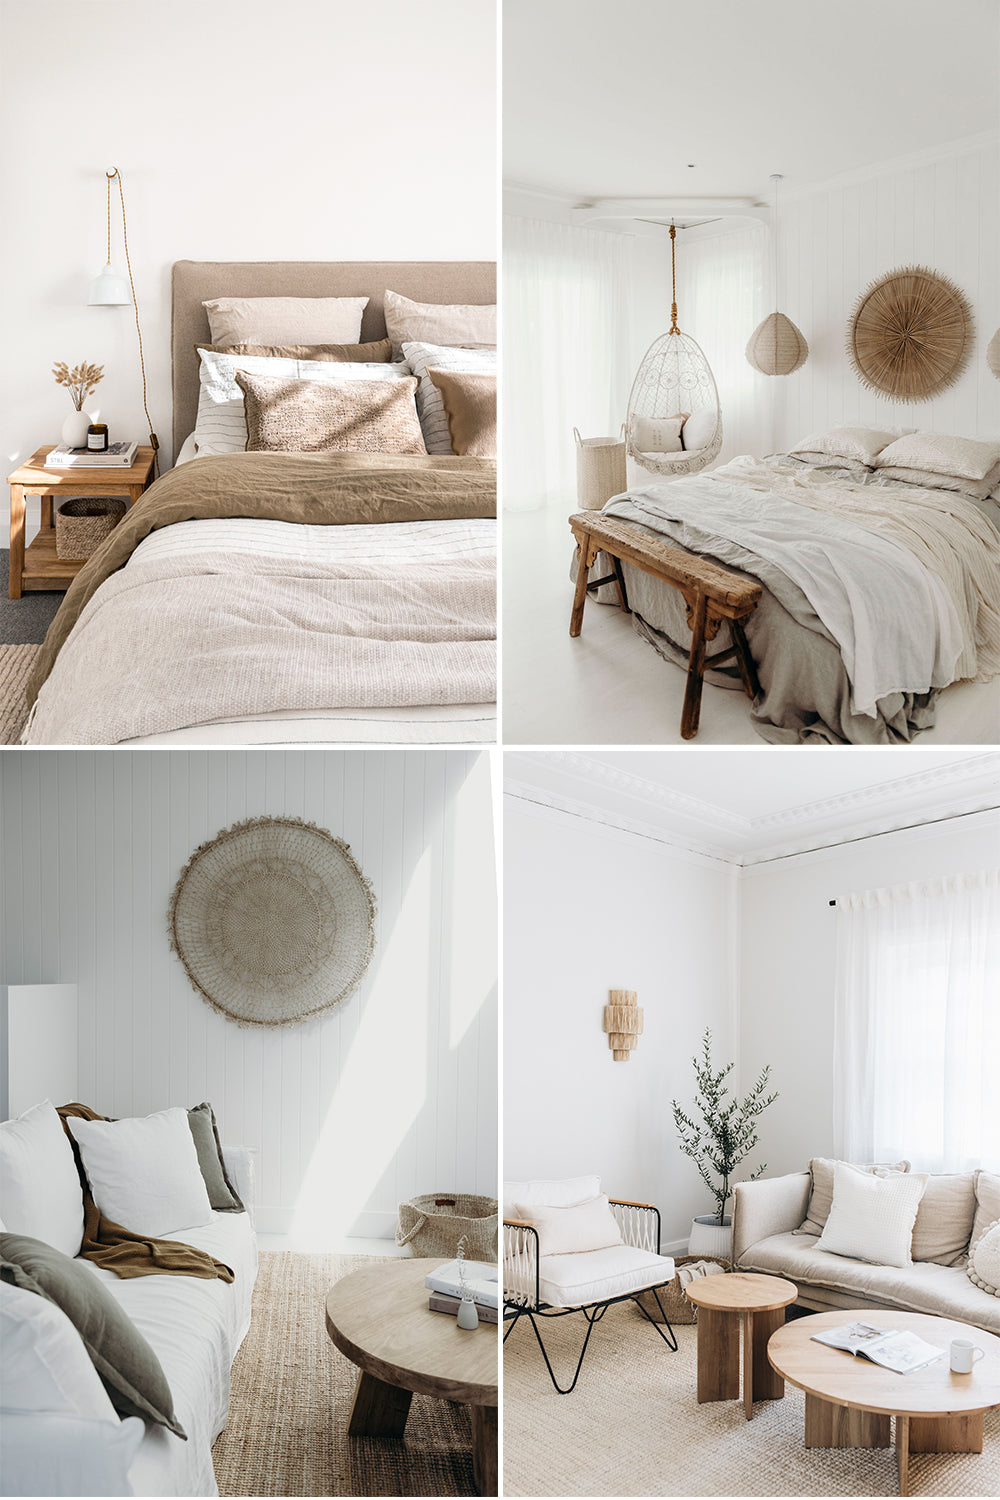 How to layer neutral tones. Natural textiles and cushions in bedrooms and living rooms.